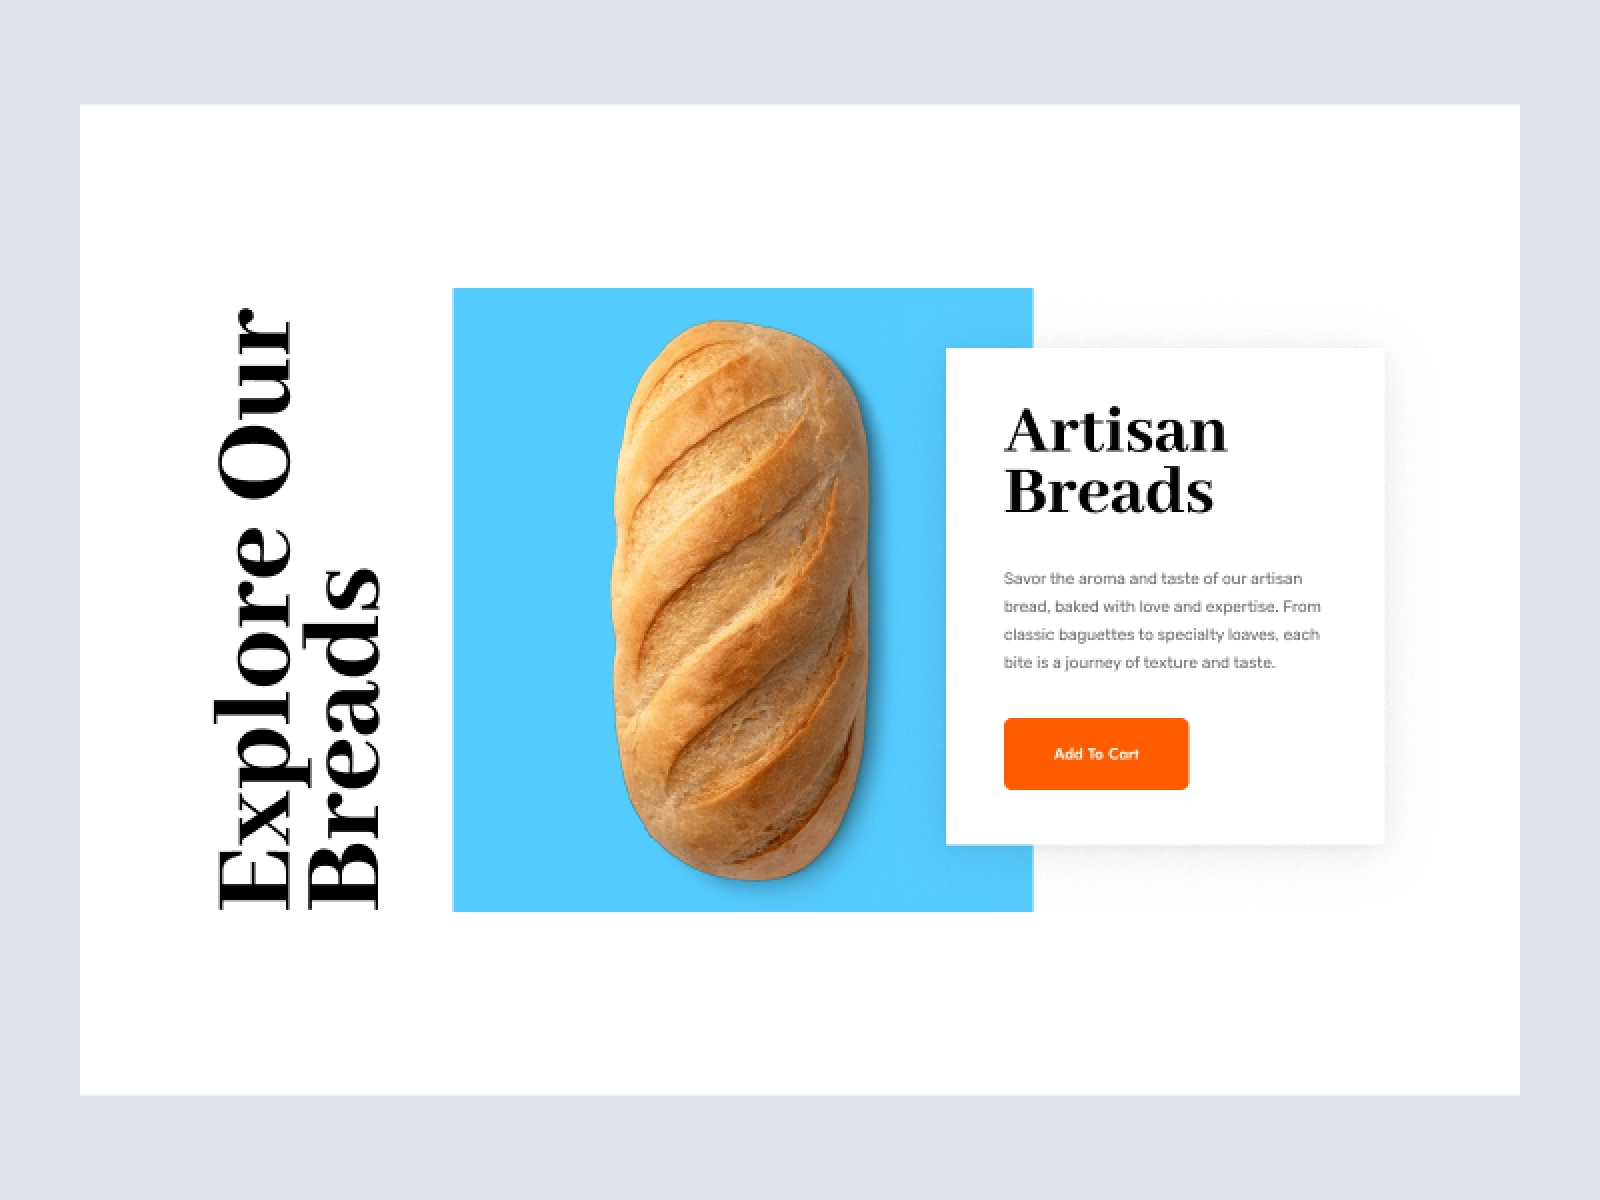 Bakery Shopify Store Design for Adobe XD - screen 2